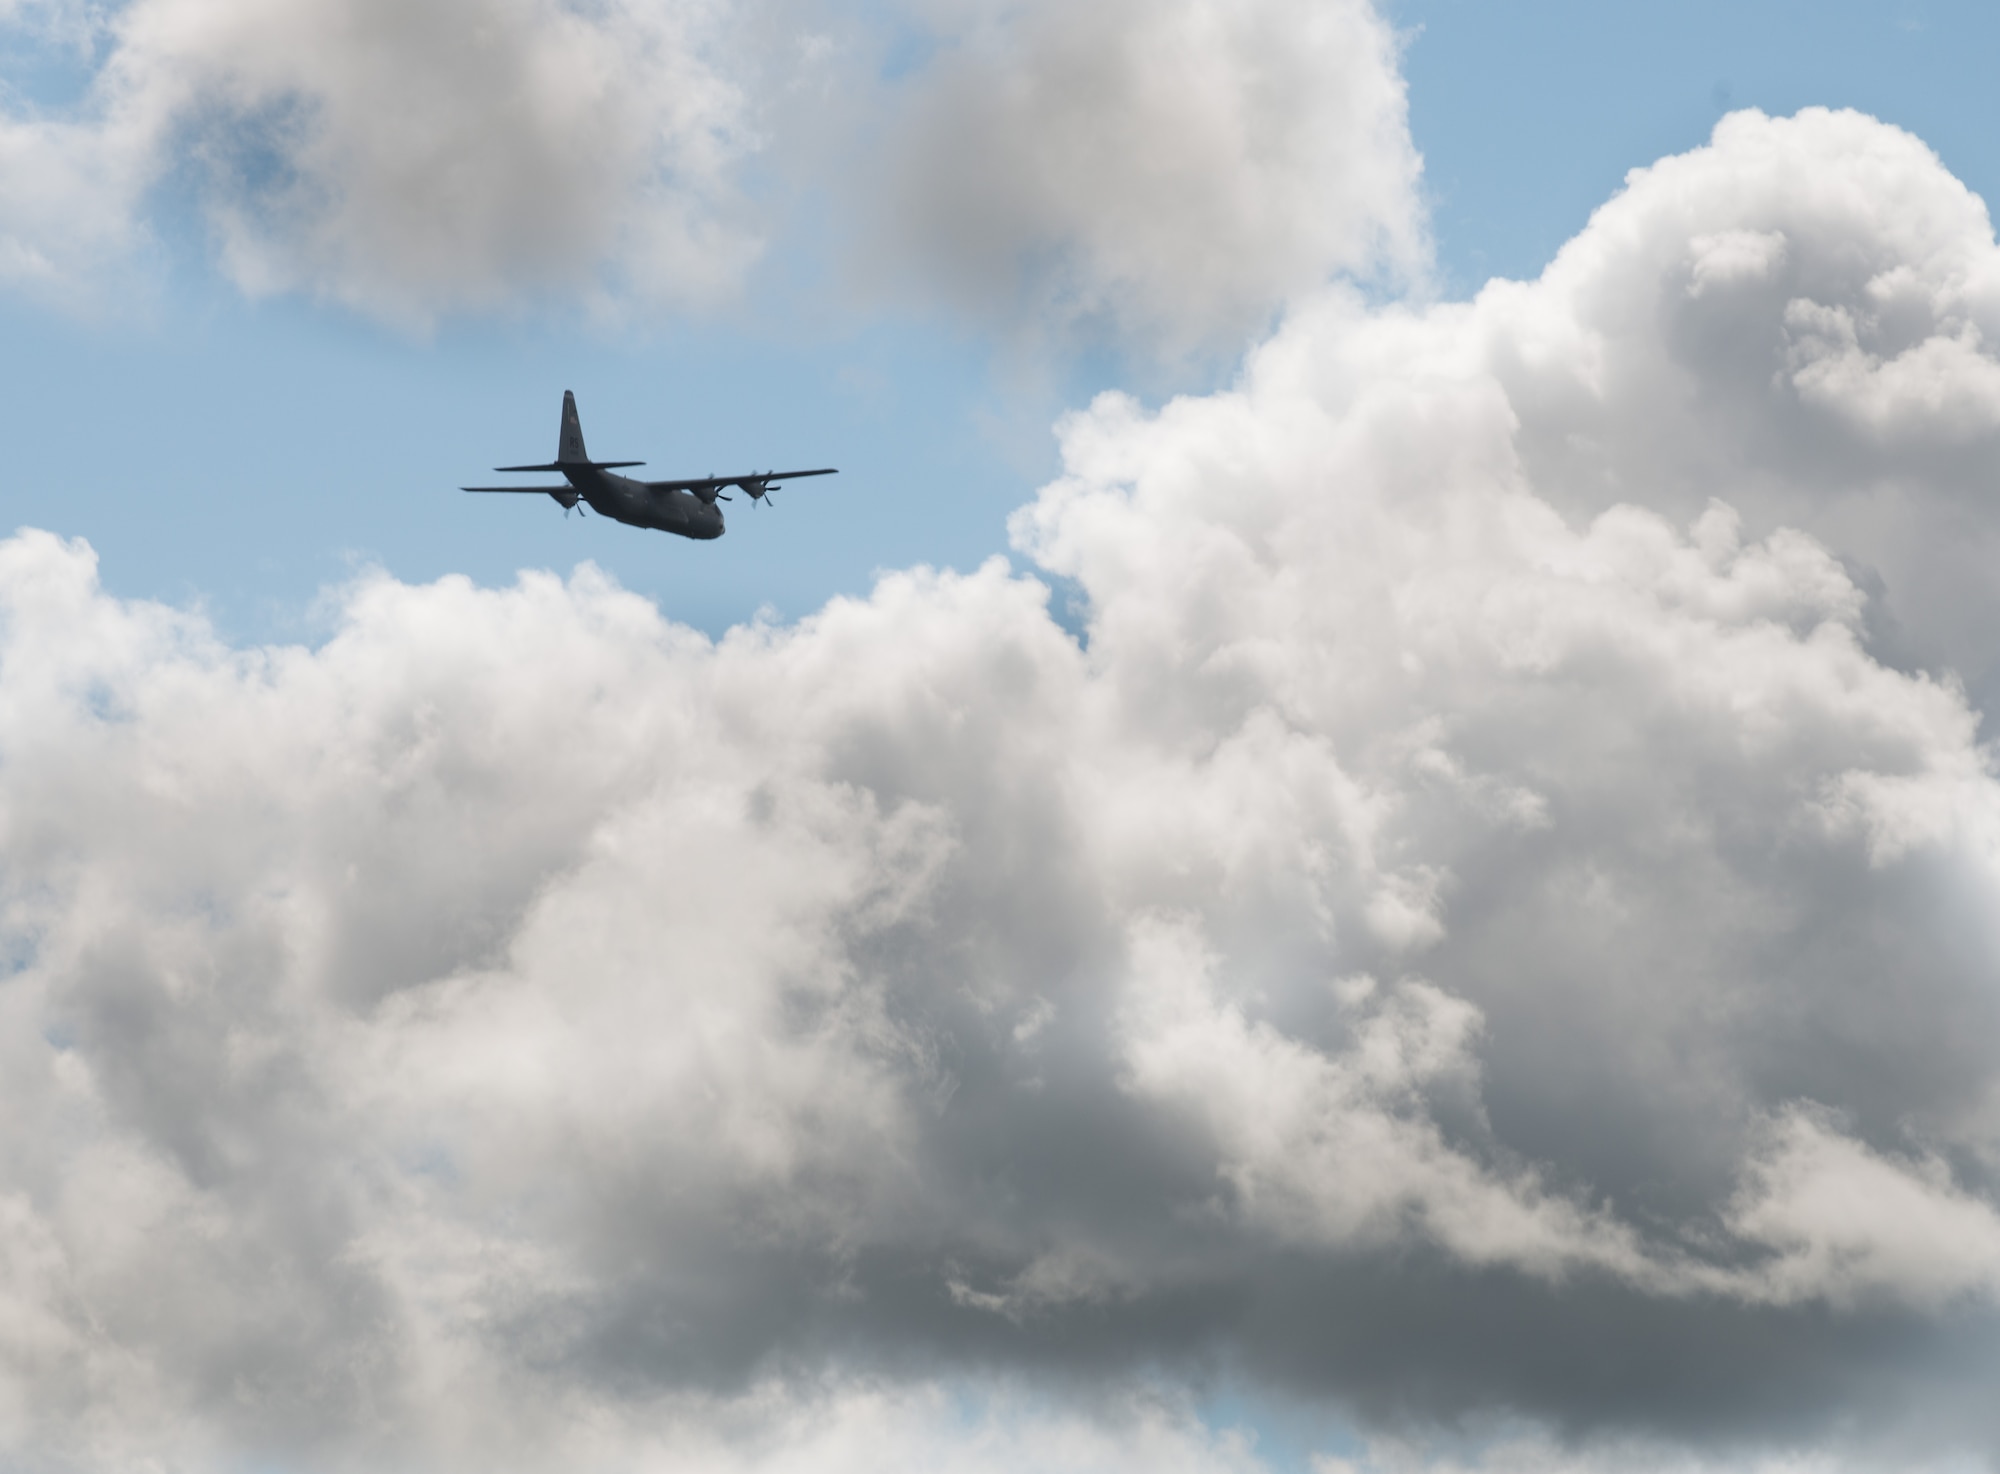 A C-130 J-model assigned to the 37th Airlift Squadron flies into clouds above Lielvarde Air Base, Latvia, June 17, 2014 in part of the exercise Saber Strike 2014. In total, three 37th AS airframes landed on Lielvarde, making them the first ever U.S. Air Force aircraft to land on the runway. The 37th AS aircraft brought approximately 92 Airmen from the 435th Contingency Response Group and equipment needed to build a bare base during the Air Force-specific training. (U.S. Air Force photo/Senior Airman Jonathan Stefanko)